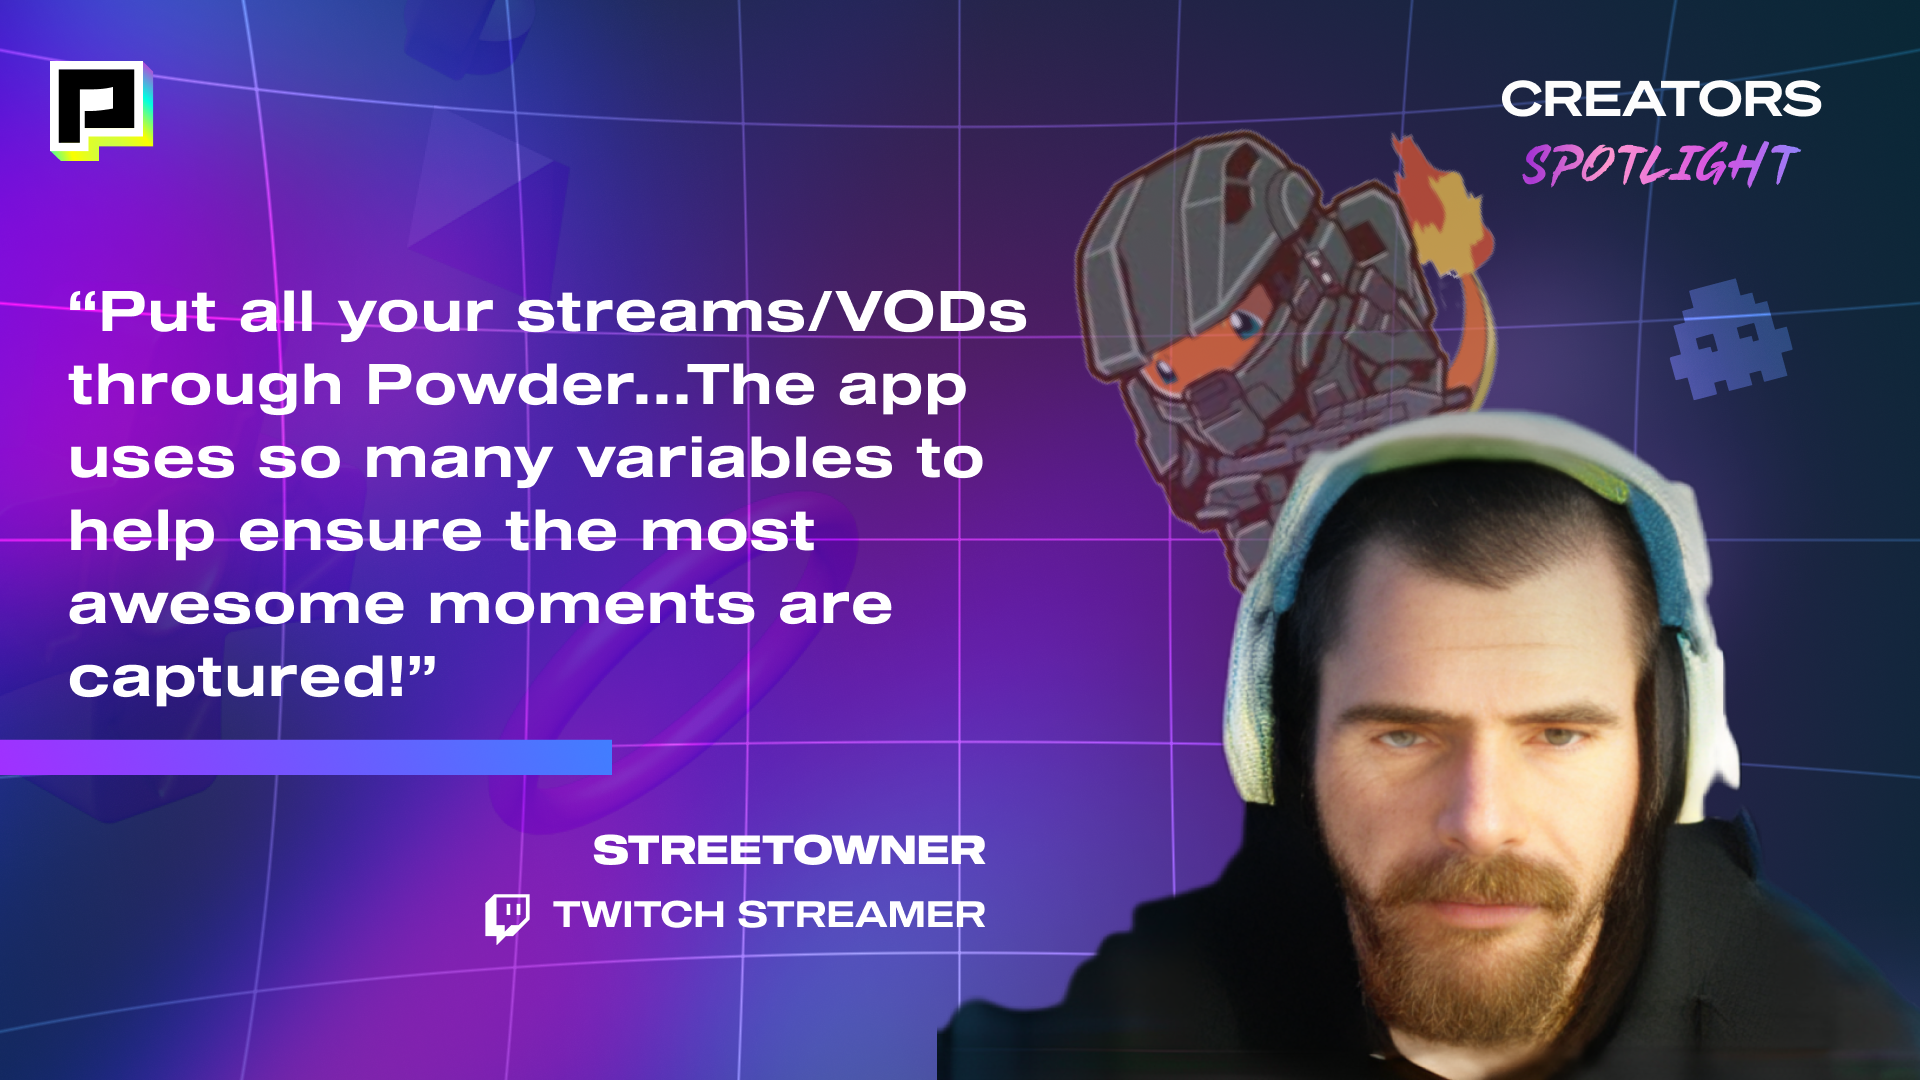 Image of Twitch Streamer, STREETOWNER with his quote, "Put all your streams/VODs through Powder...The app uses so many variables to help ensure the most awesome moments are captured!"